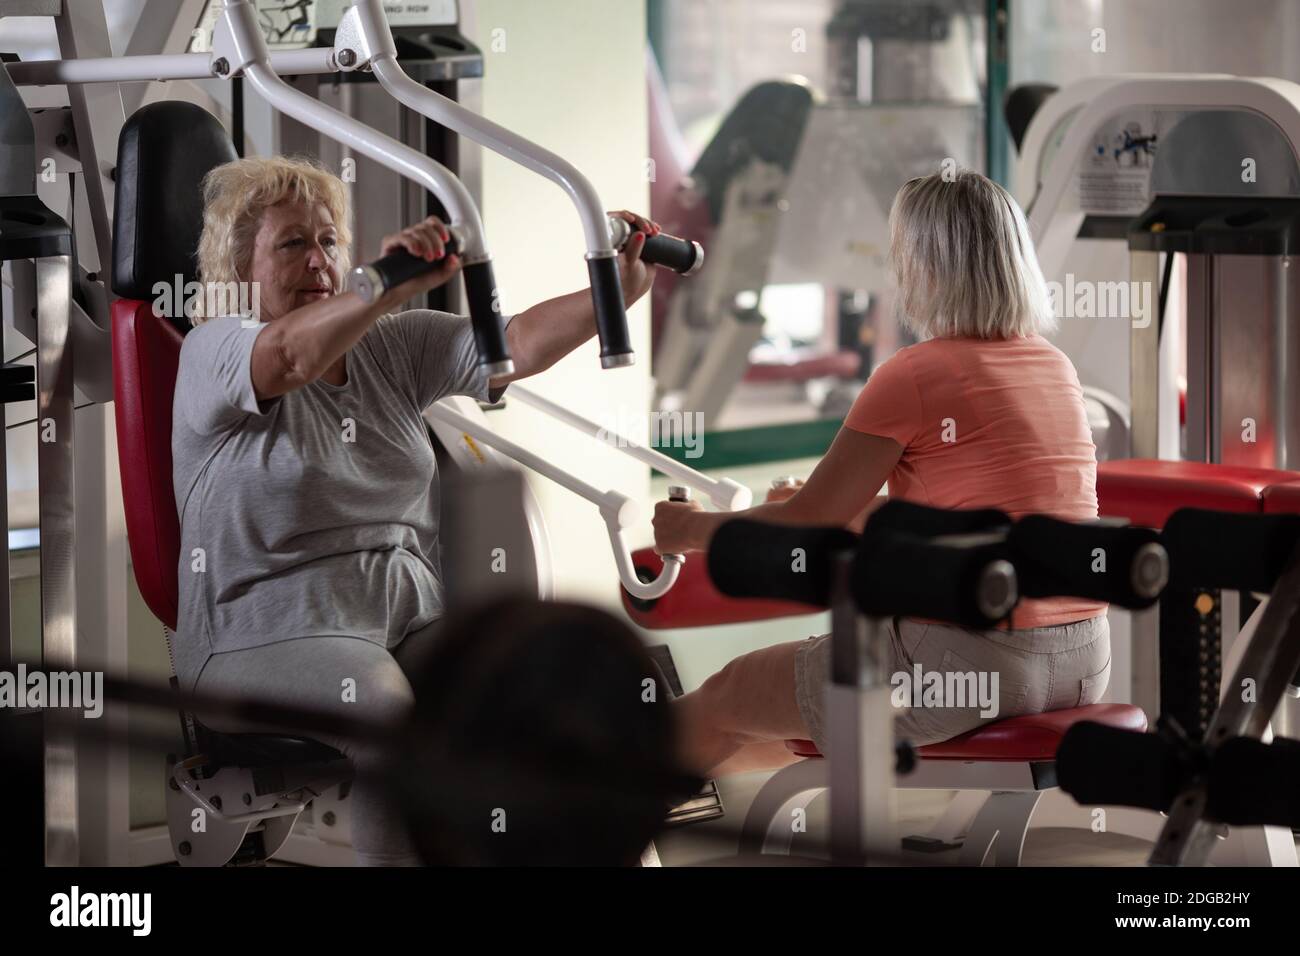 Moms and fitness Stock Photo